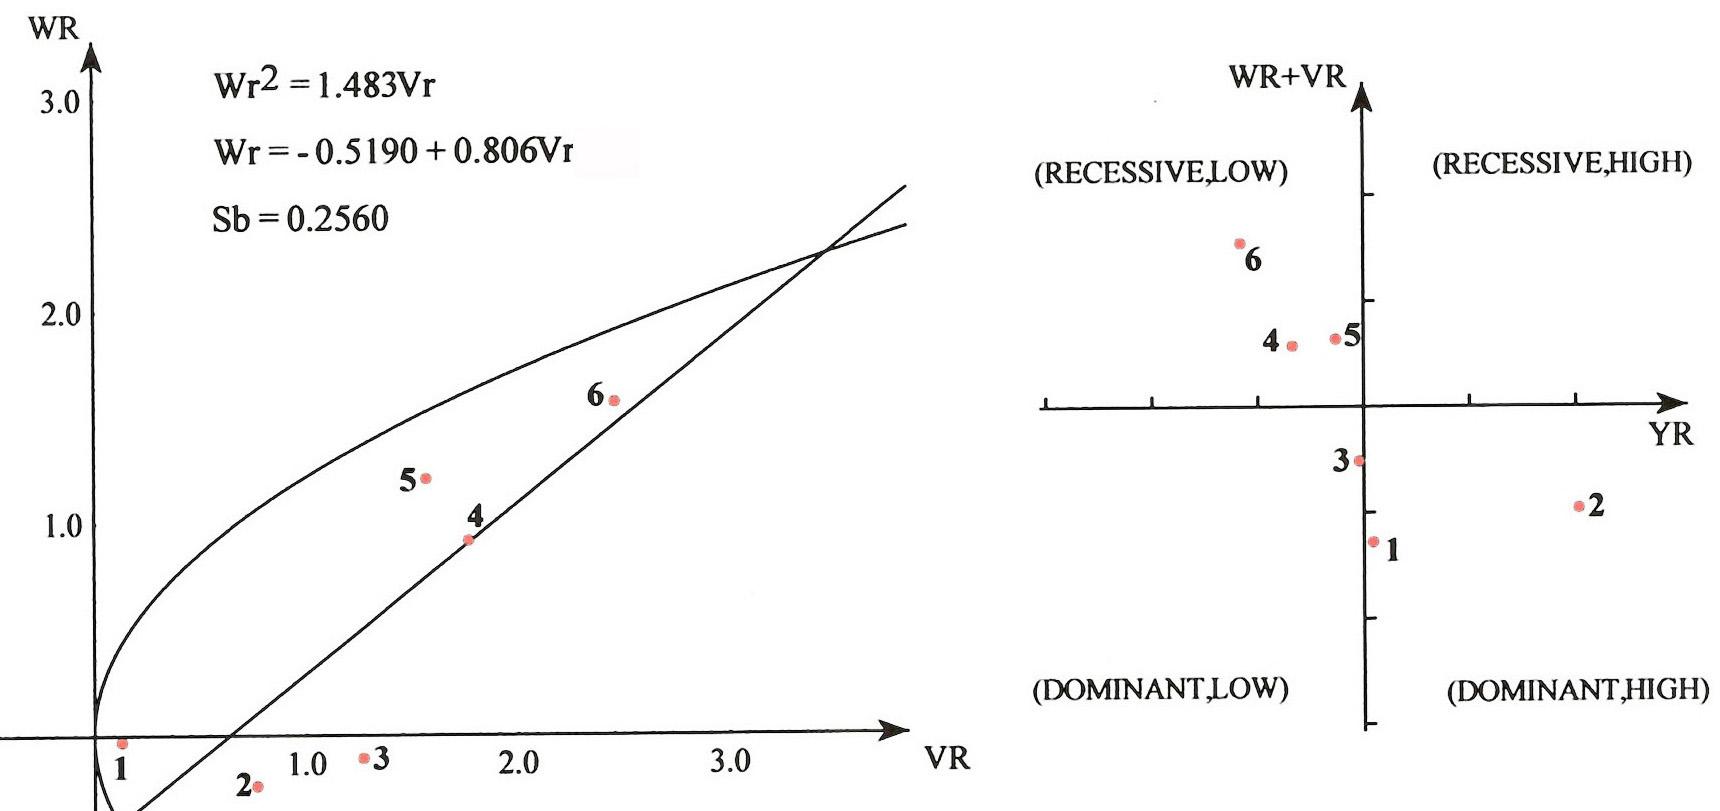 Variance(Vr), covariance(Wr) and standardized deviation graph for leaf width (1: Cheongchima, 2: Nokchima, 3: Yulpung, 4: Jaba, 5: Kangpung, 6: Clarement).